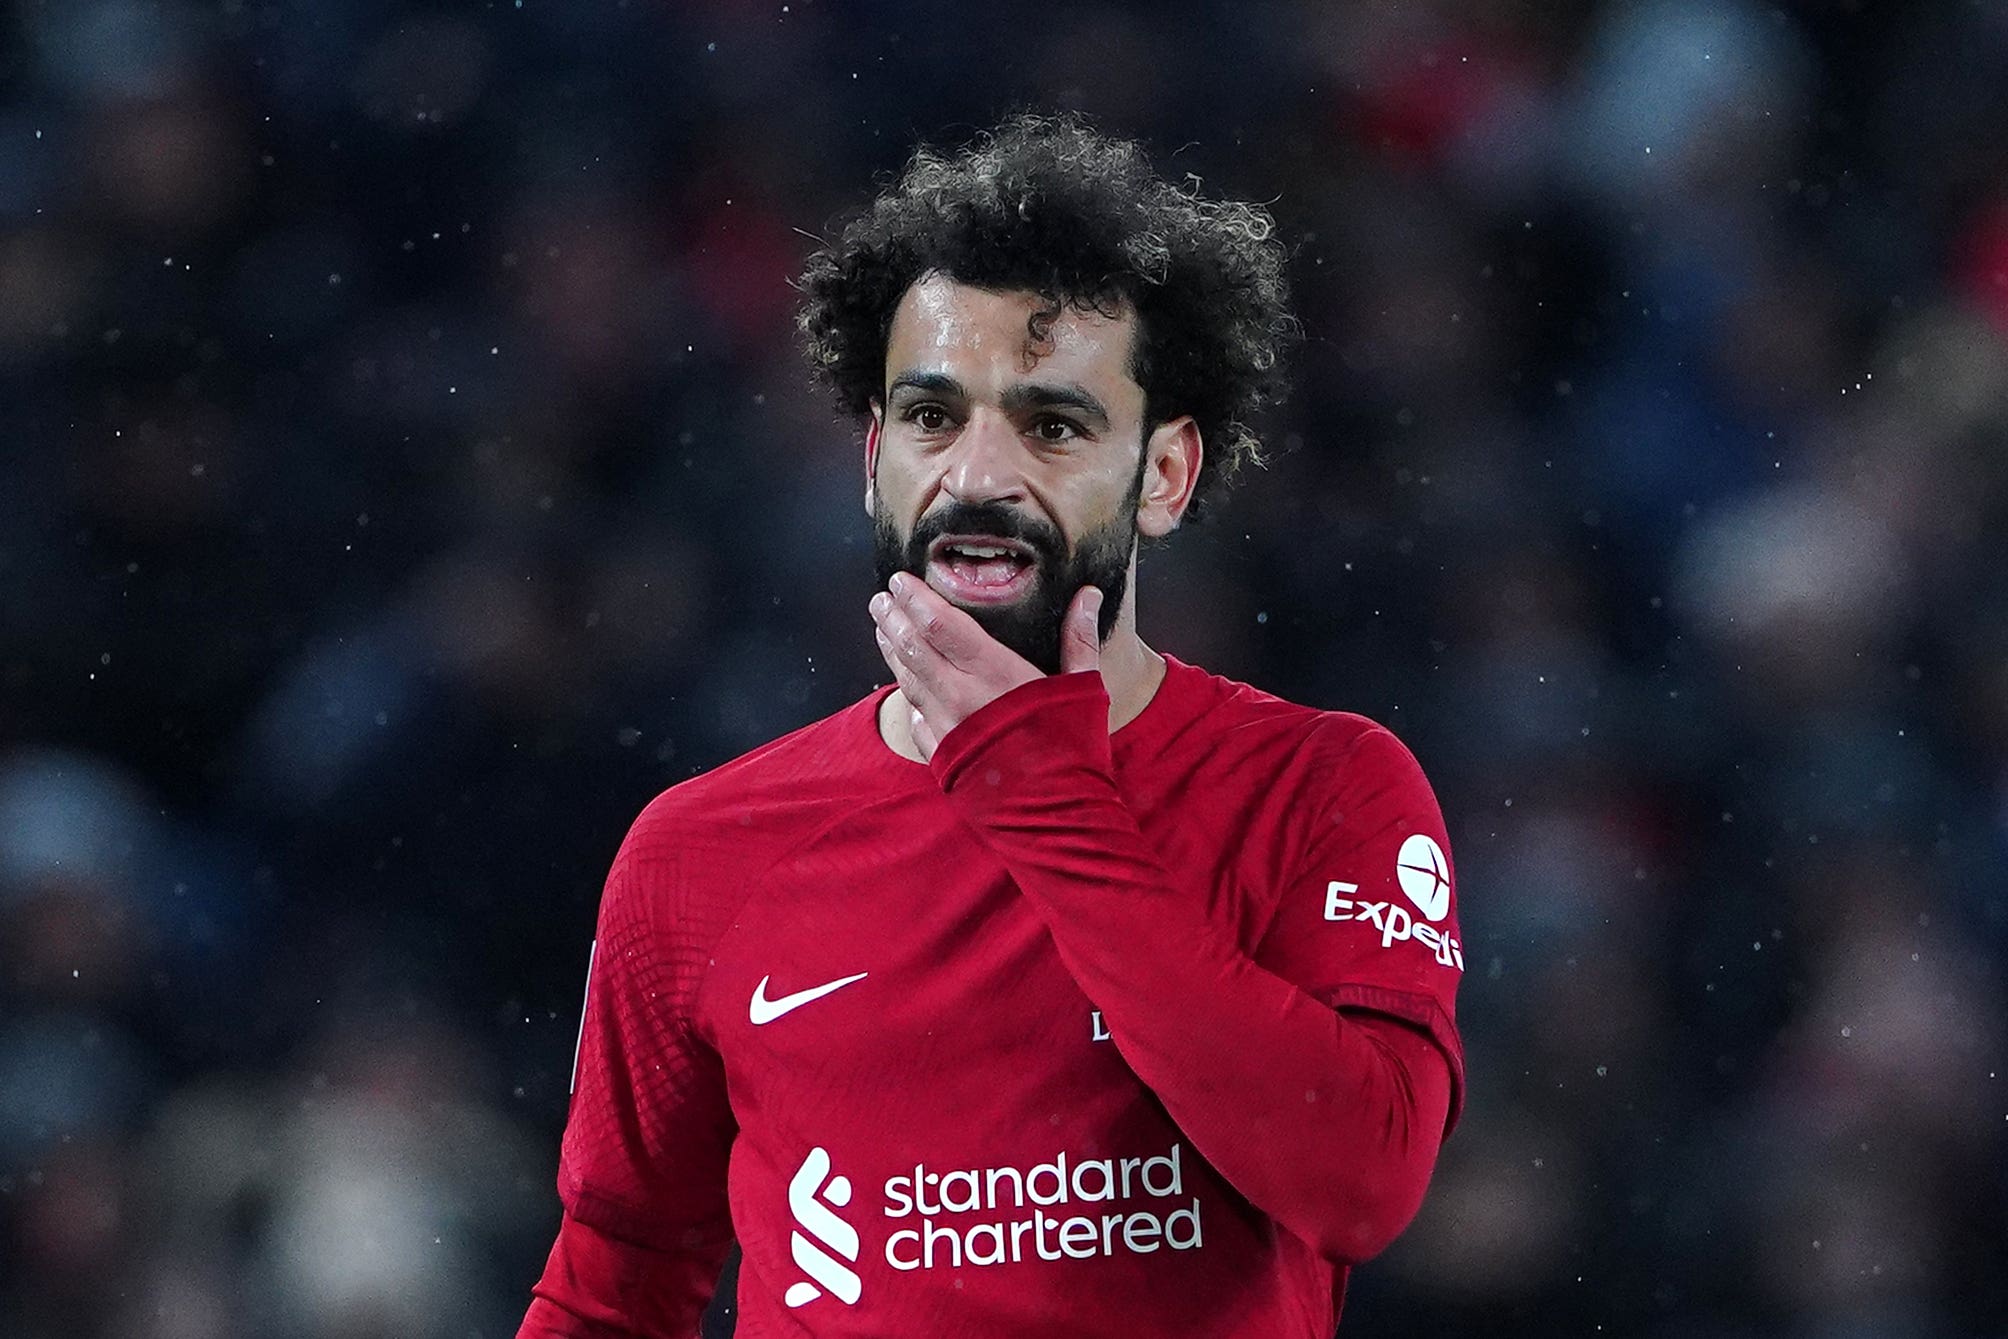 Mohamed Salah’s agent has dismissed speculation linking the forward with a move to Saudi Arabia